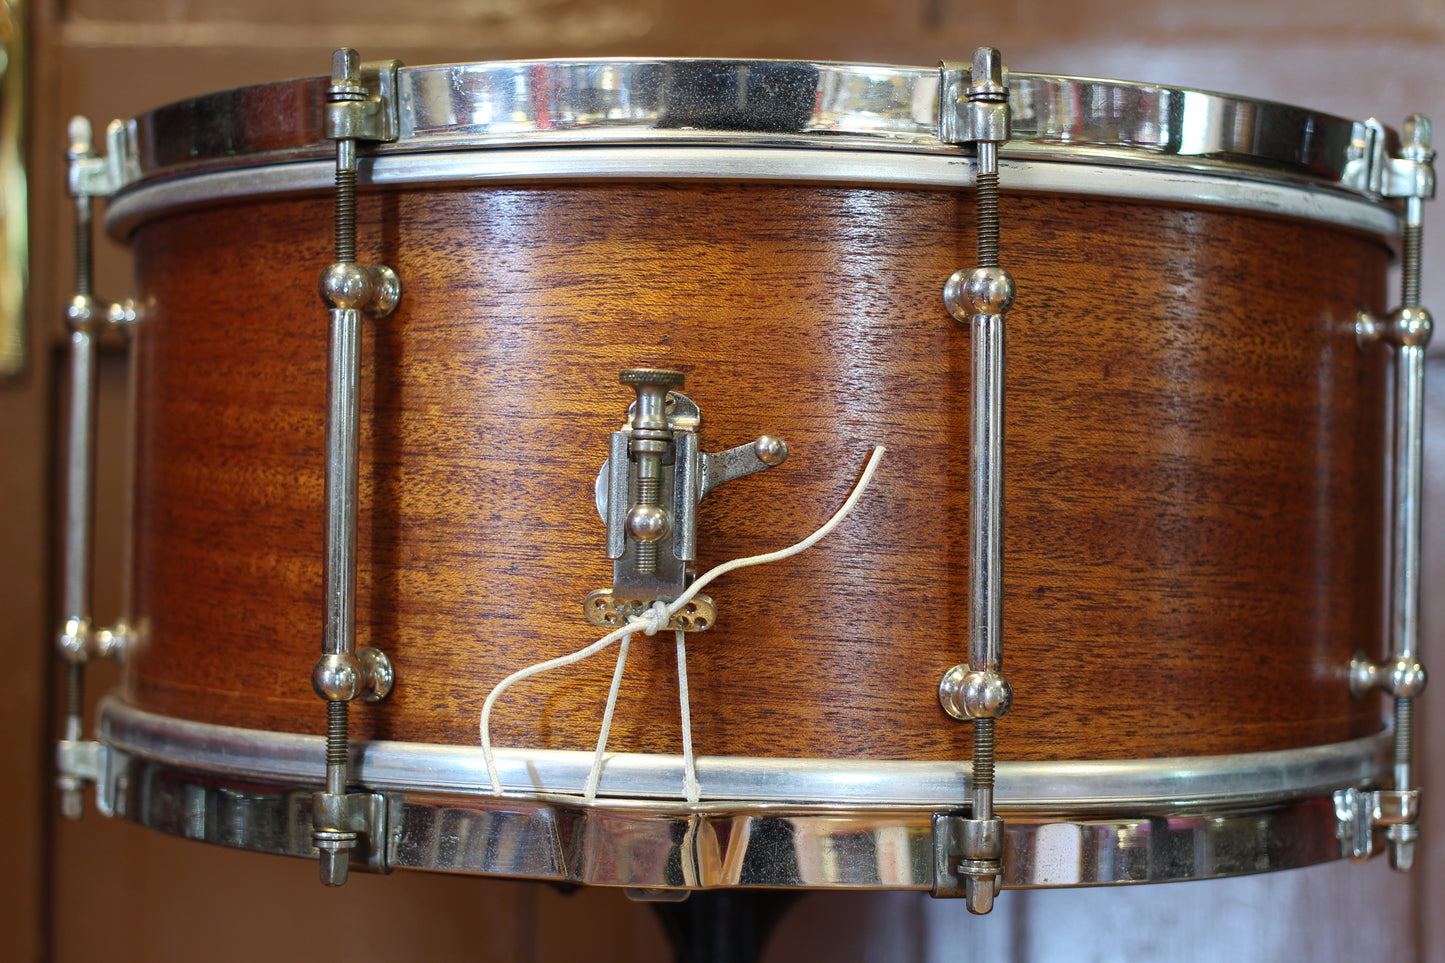 1930's Ludwig 'Pioneer' Model Snare Drum 6.5"x14" in Natural Mahogany